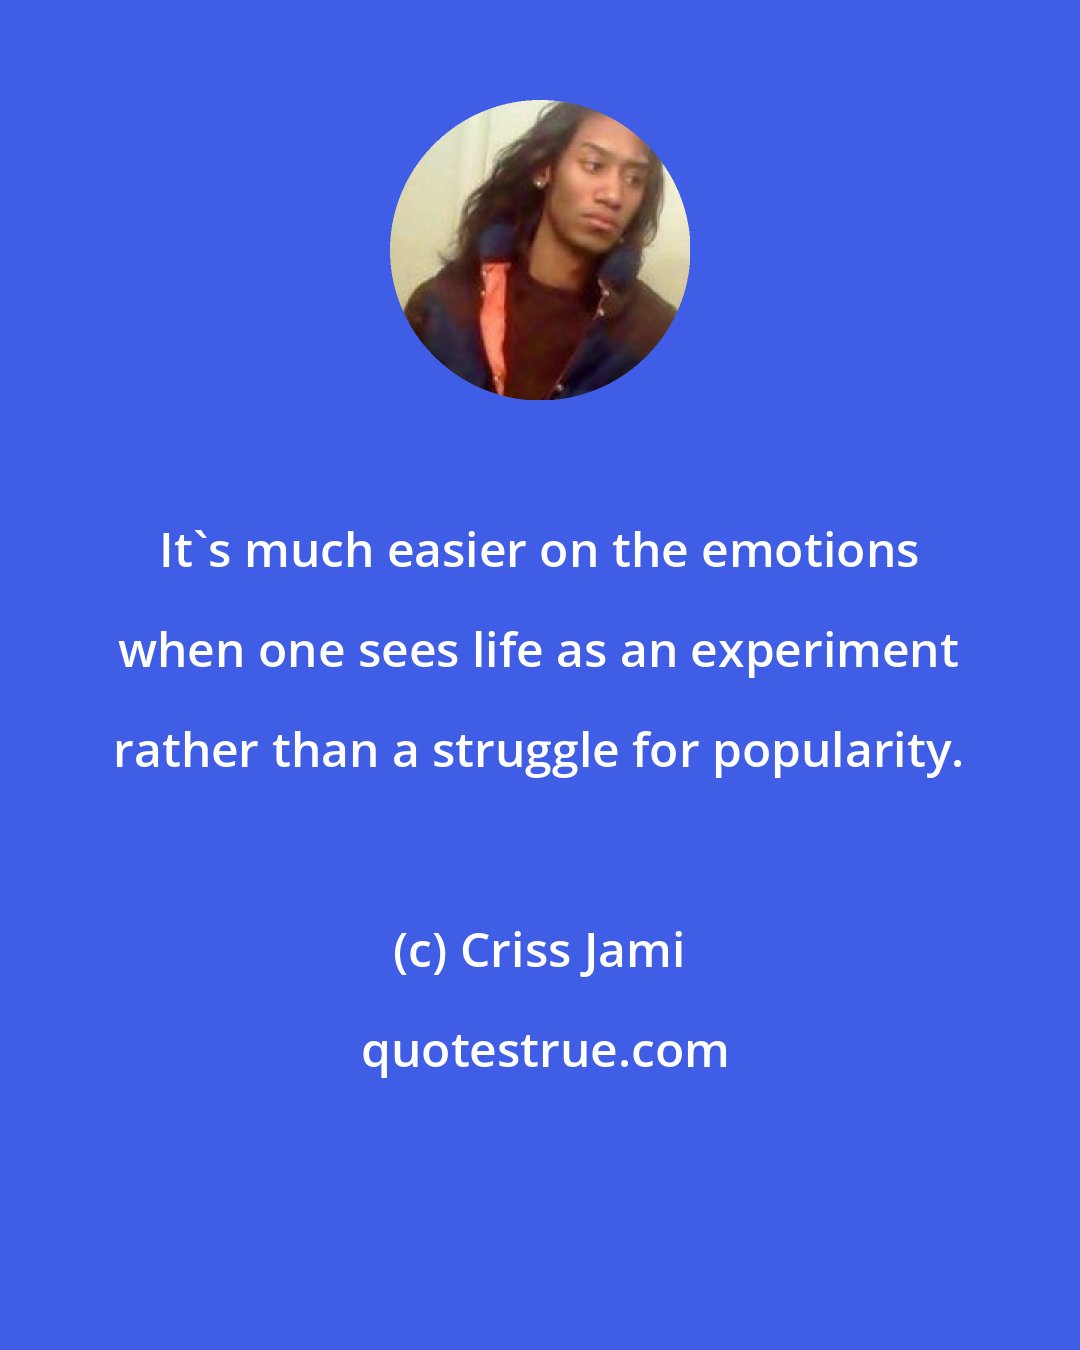 Criss Jami: It's much easier on the emotions when one sees life as an experiment rather than a struggle for popularity.